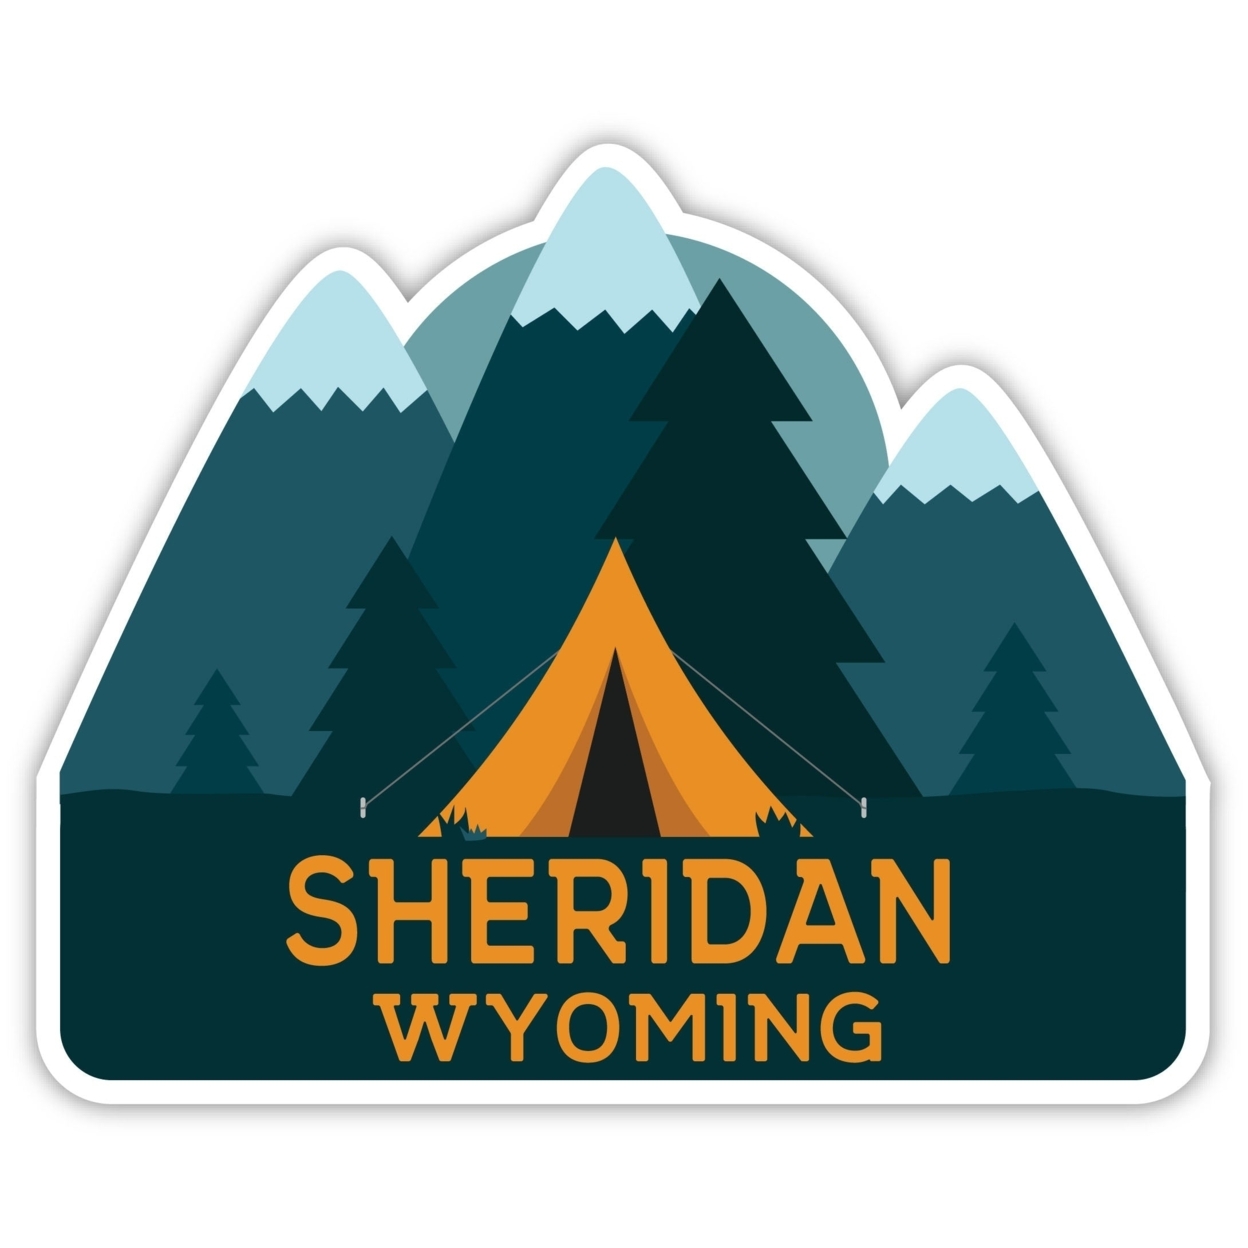 Sheridan Wyoming Souvenir Decorative Stickers (Choose Theme And Size) - Single Unit, 2-Inch, Tent